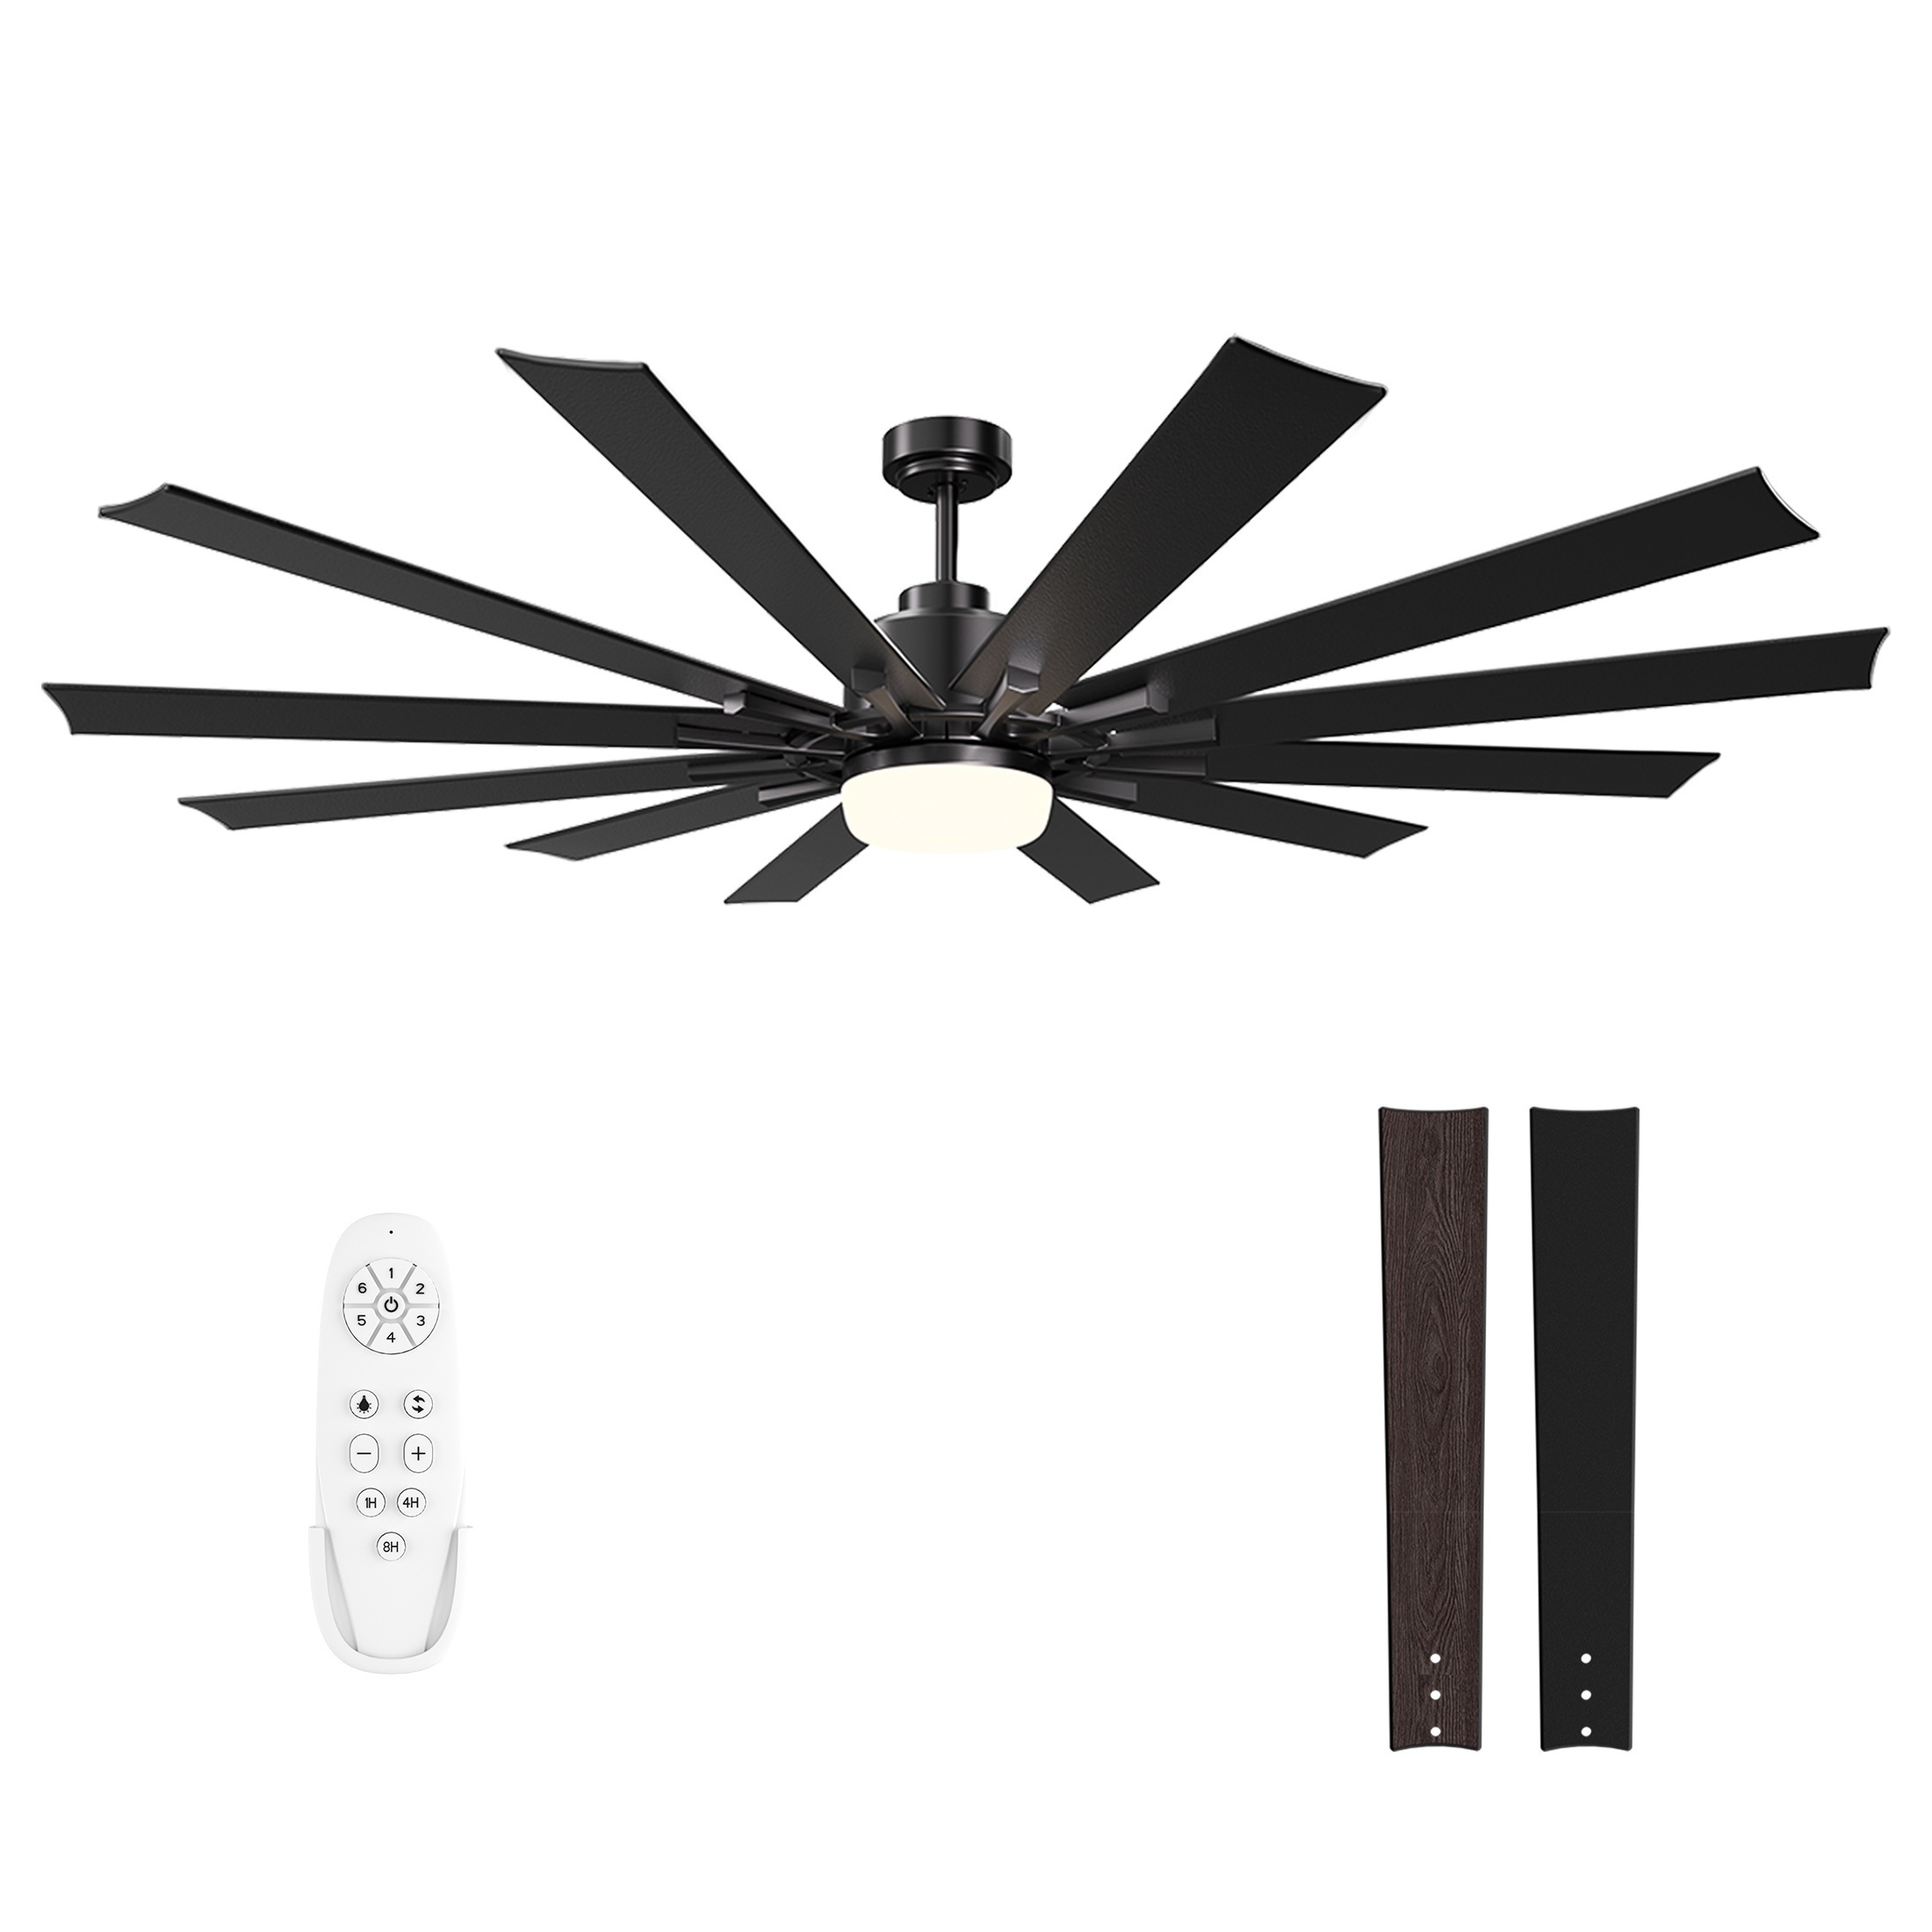 

72" Inch Ceiling Fans With Lights And Remote - Indoor/outdoor Ceiling Fan With Light, 12 Blades, Large Air Volume, Reversible Quiet Dc Motor, Dimmable Black Large Ceiling Fan For Living Room